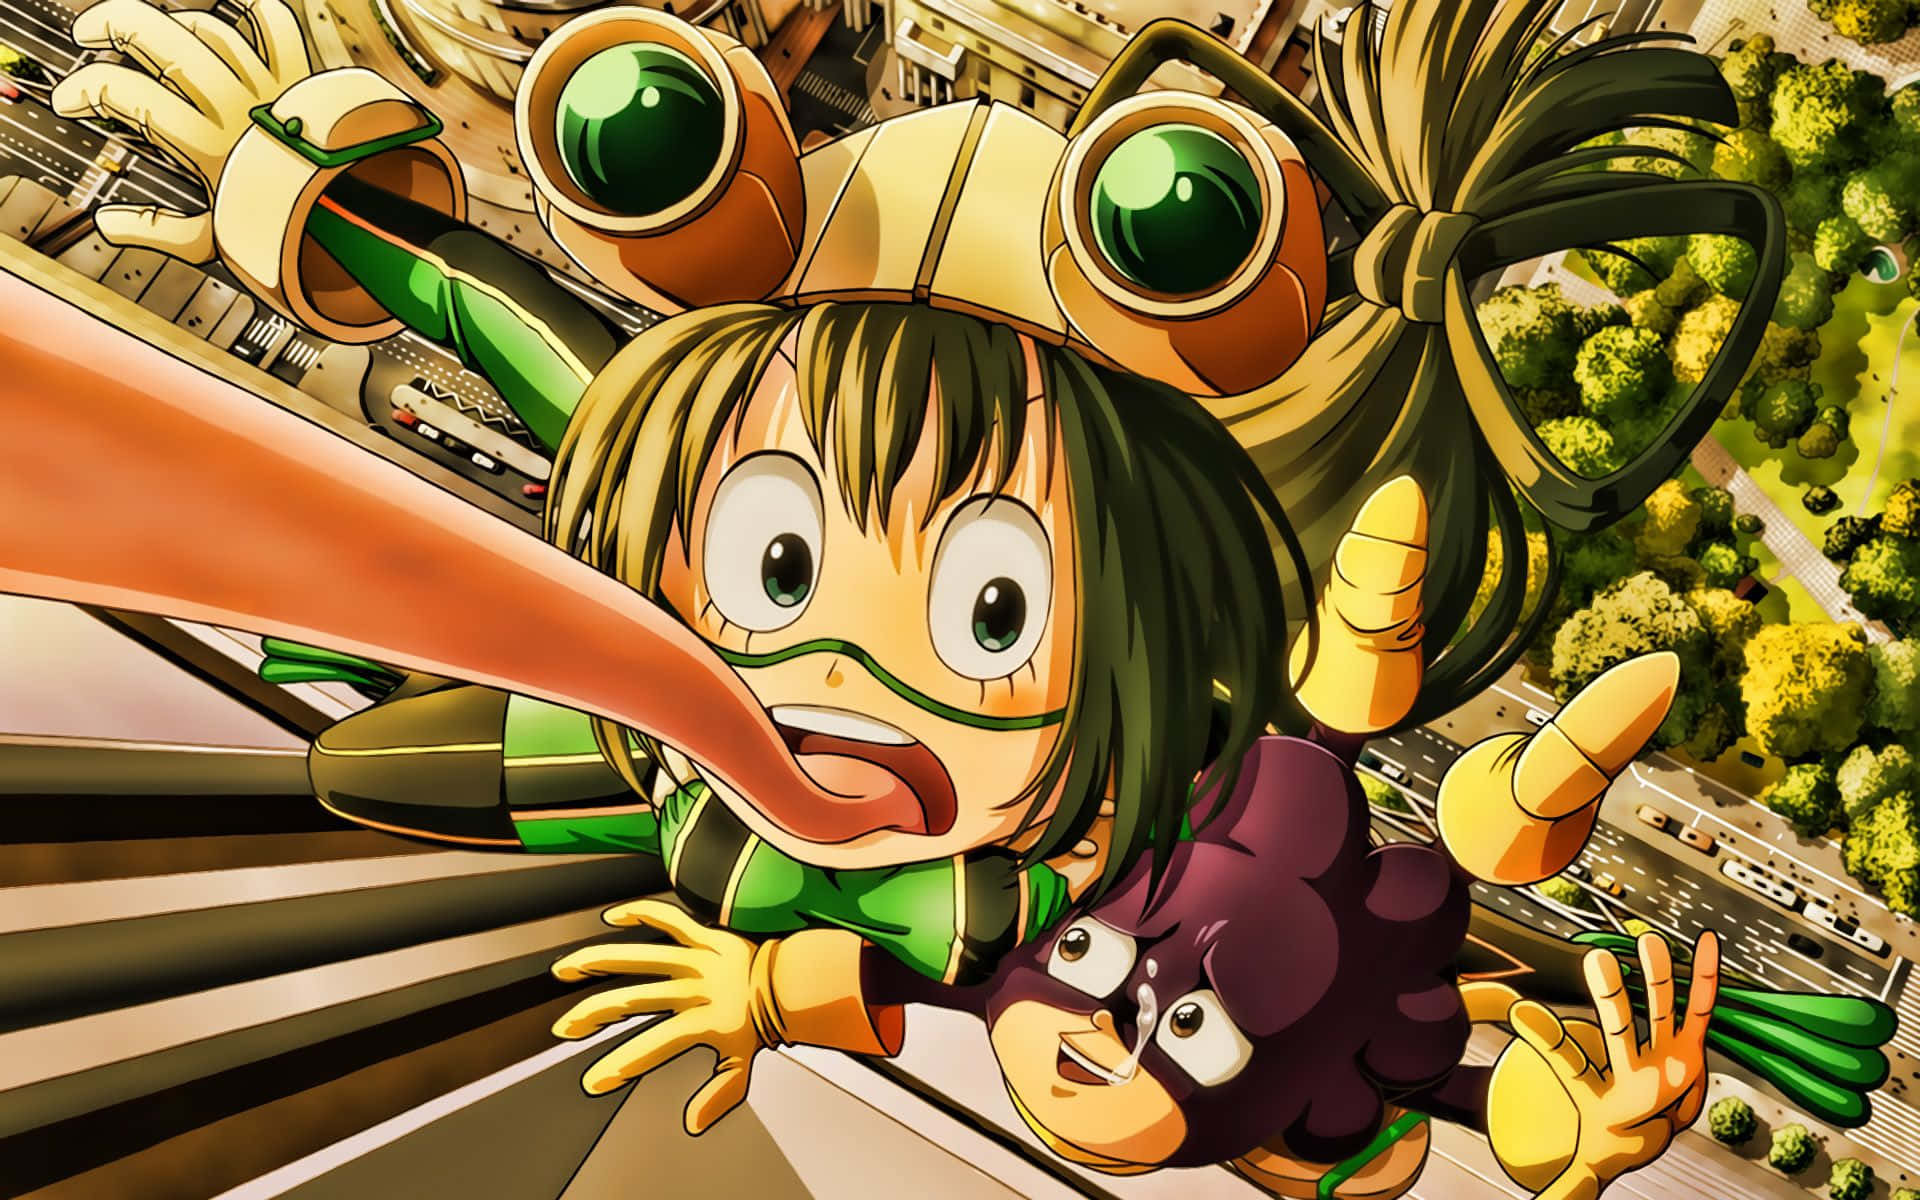 Look alive, Froppy is ready to join in on the fun!